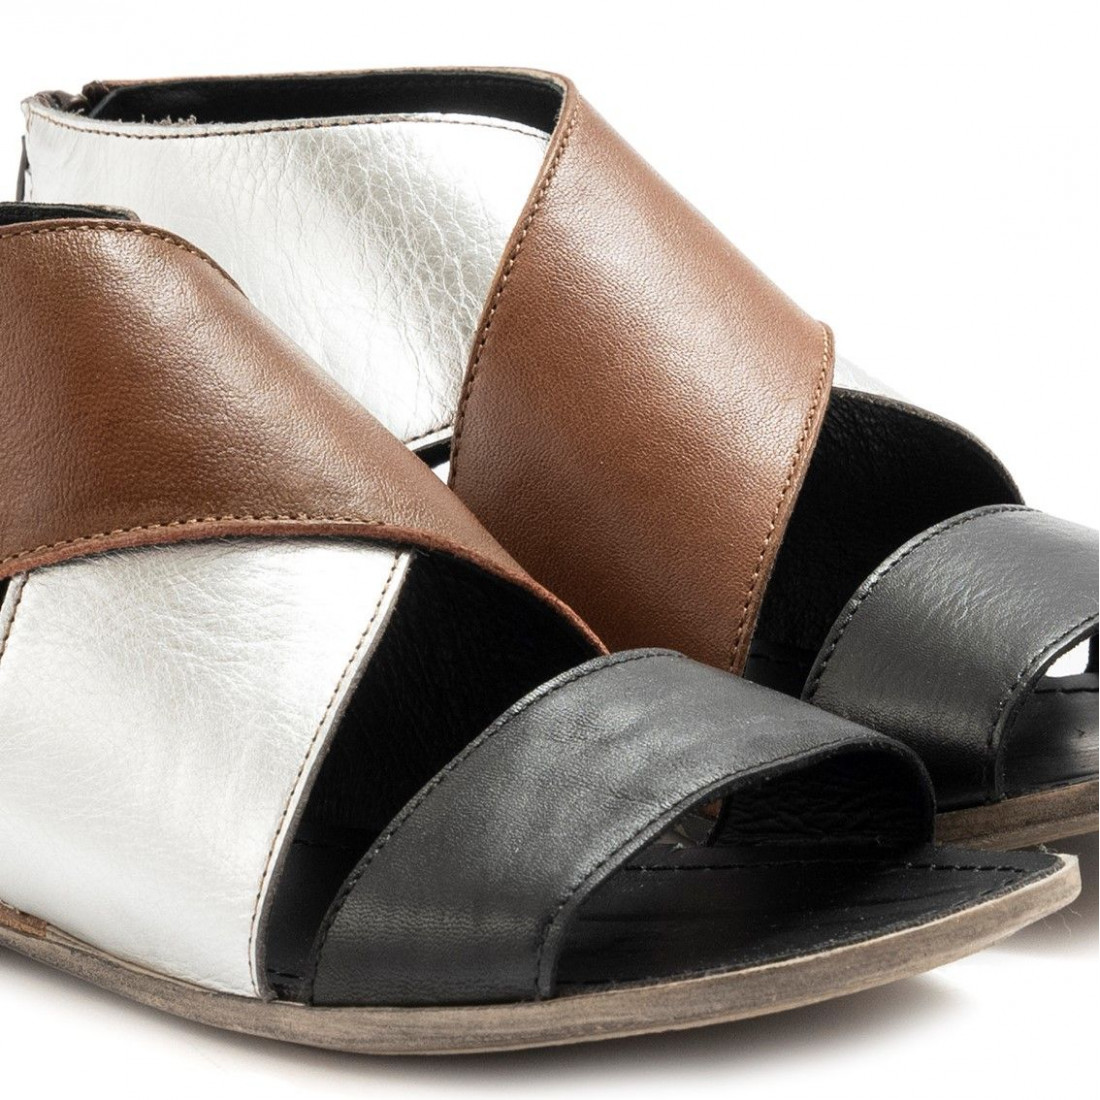 Women's sandals Le Bohemien in silver, black and brown leather